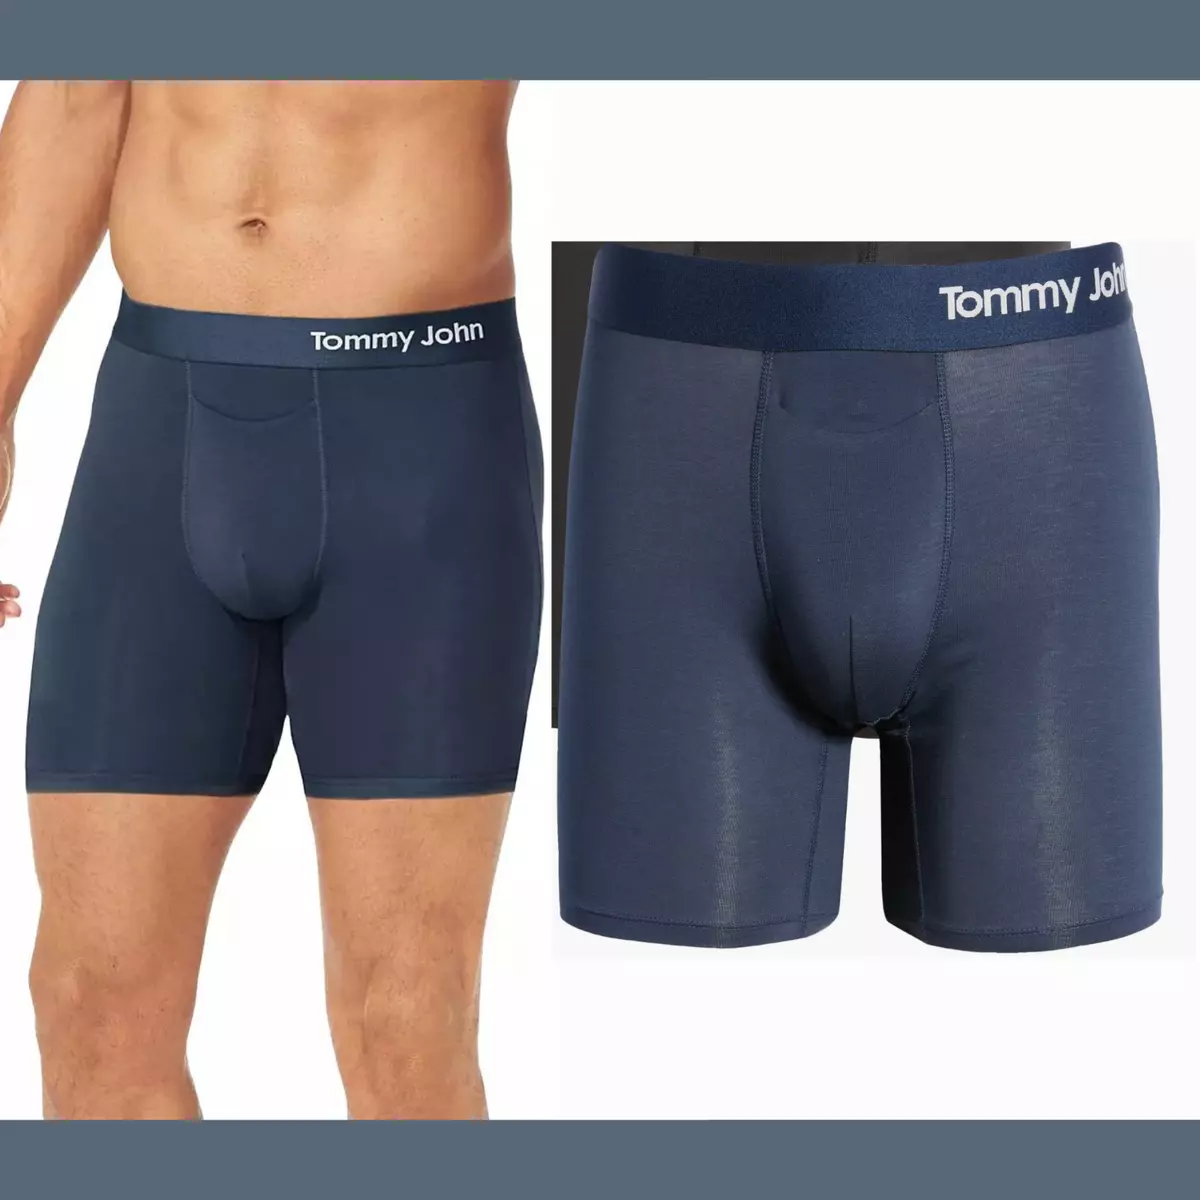 NWT $32 TOMMY JOHN [ Medium ] Cool Cotton 6-Inch Boxer Briefs in Navy Blue  #5983